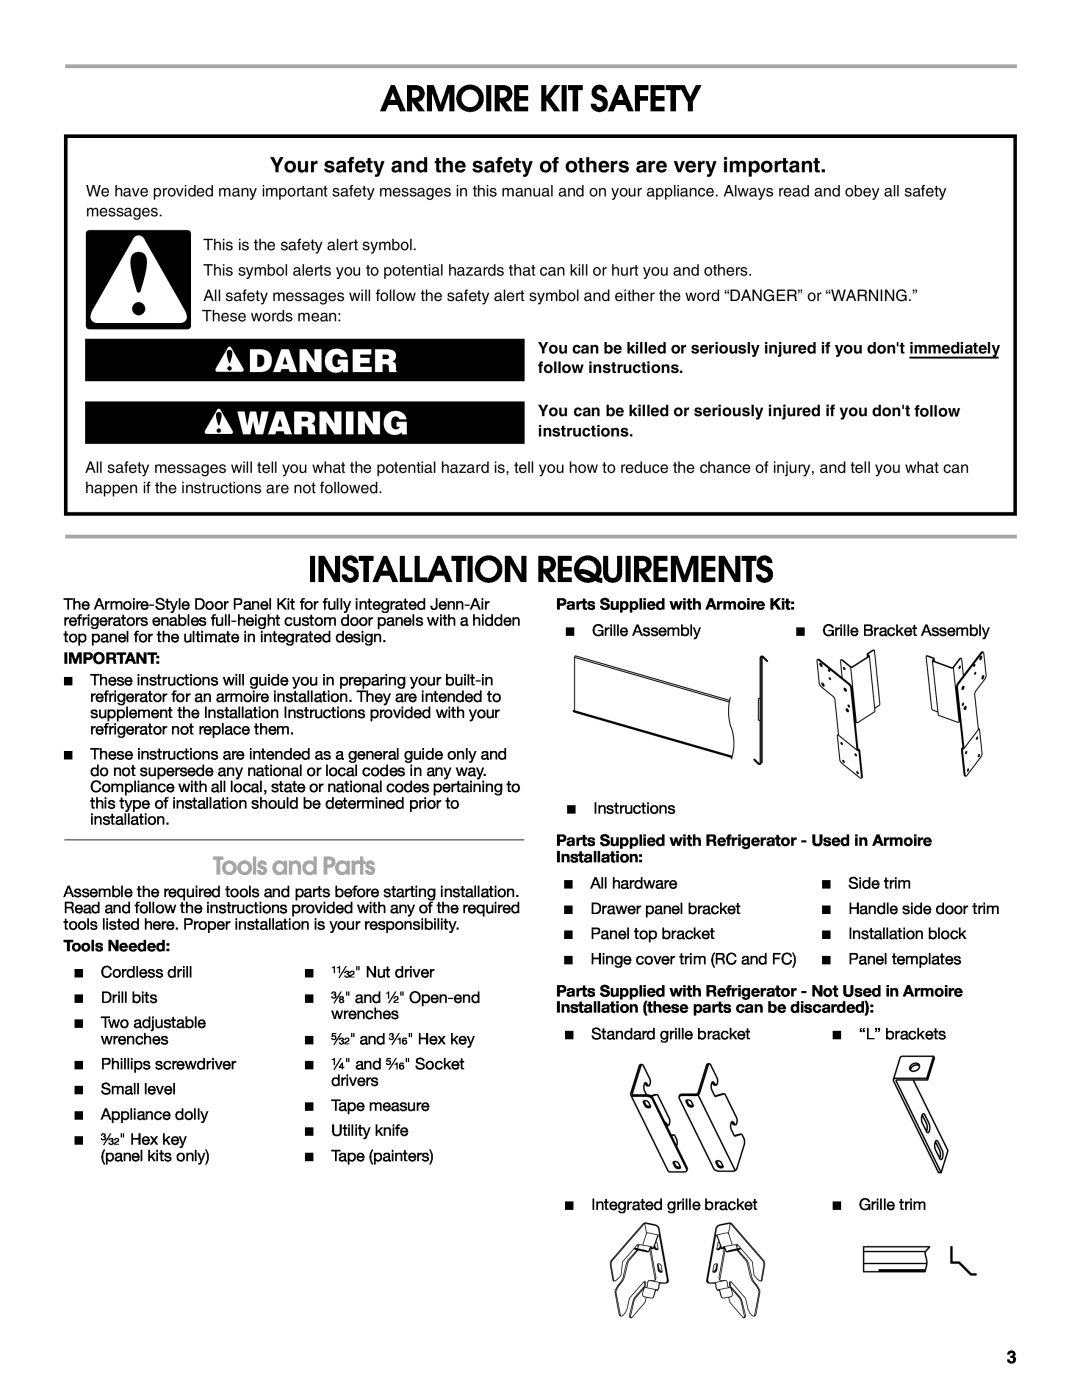 Jenn-Air W10295557C Armoire Kit Safety, Installation Requirements, Danger, Tools and Parts, Tools Needed 